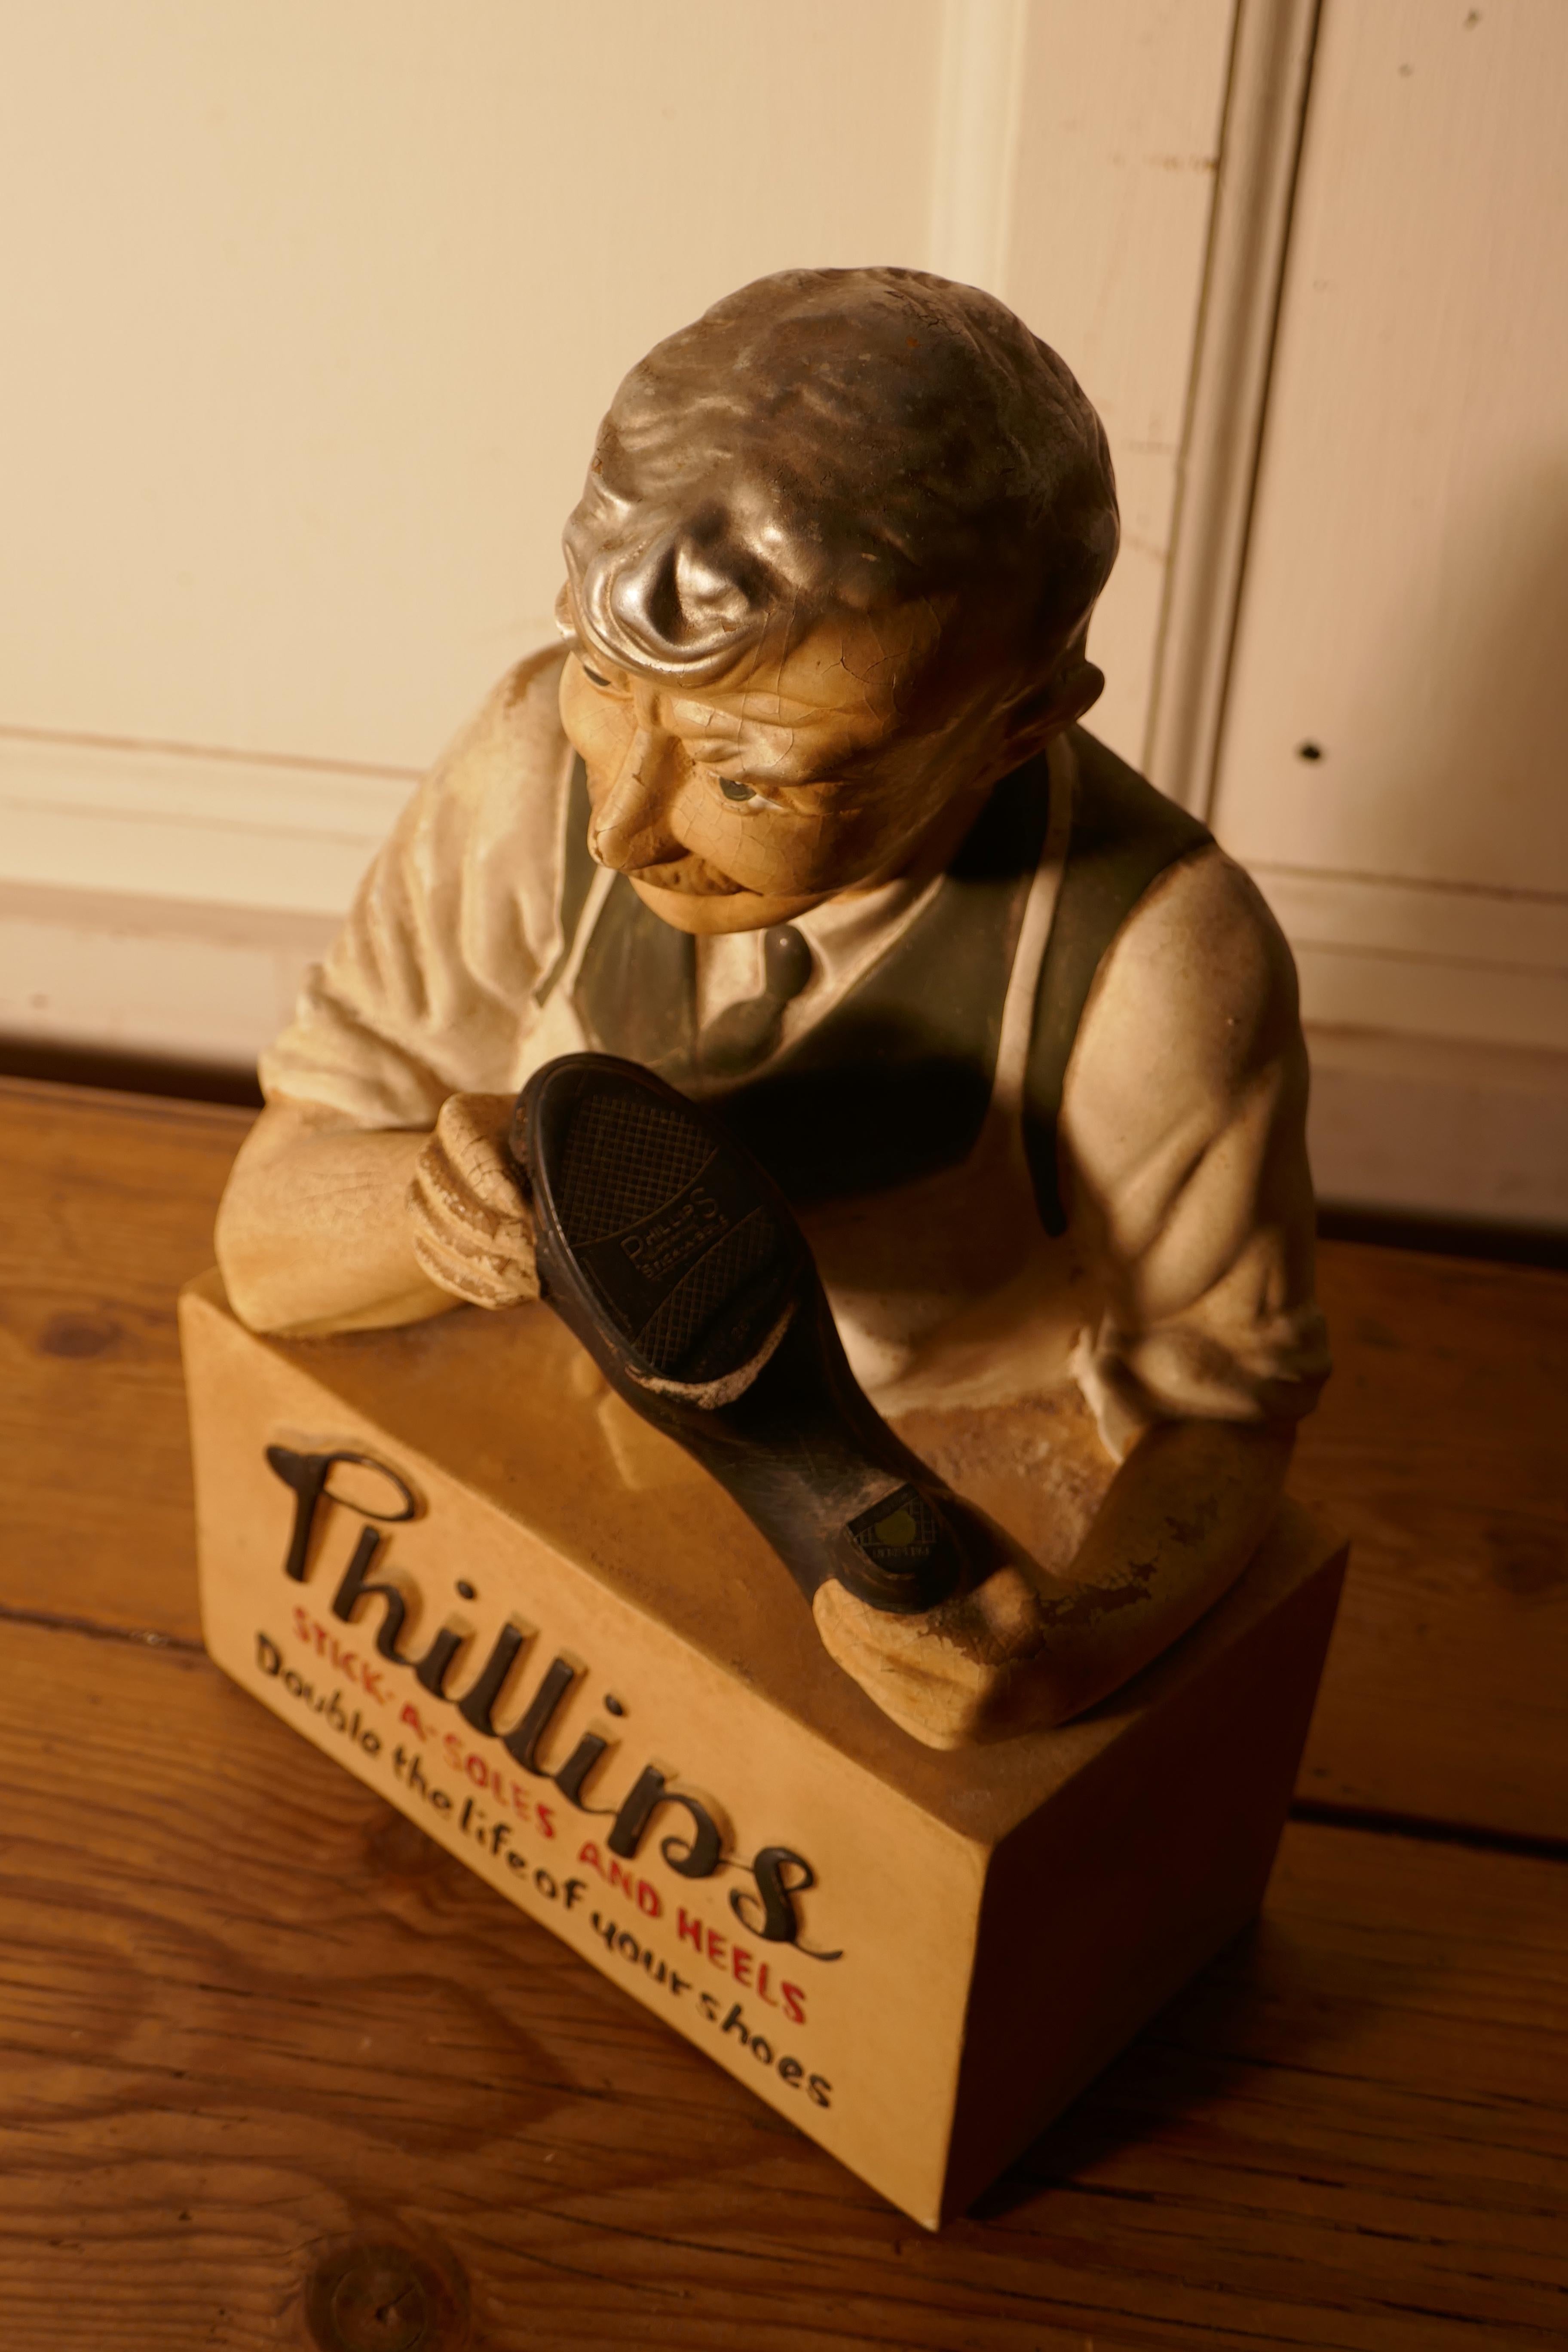 Phillips Stick a Soles and Heels Cobblers Shop Advertising Display Model In Good Condition For Sale In Chillerton, Isle of Wight